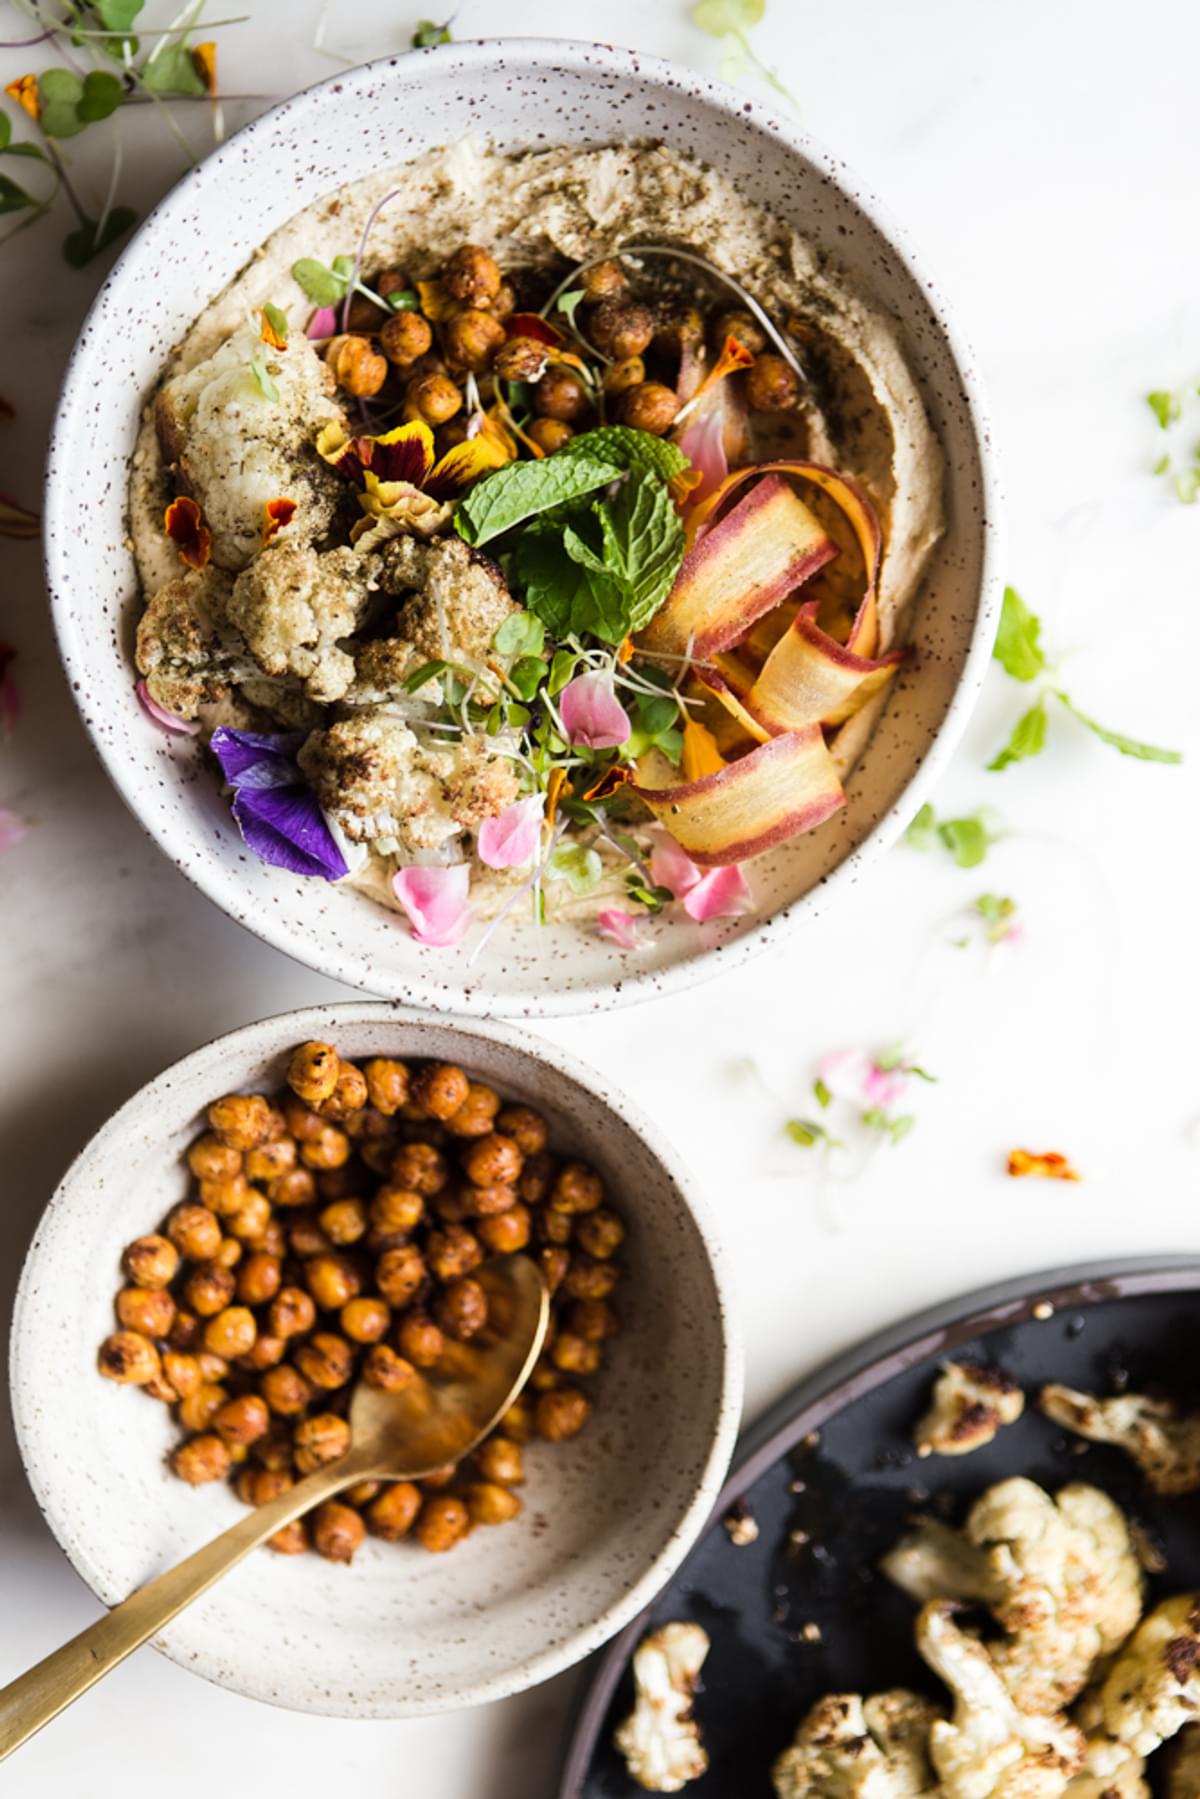 Roasted Cauliflower and Hummus Bowl with carrot ribbons, mint and crispy chickpeas